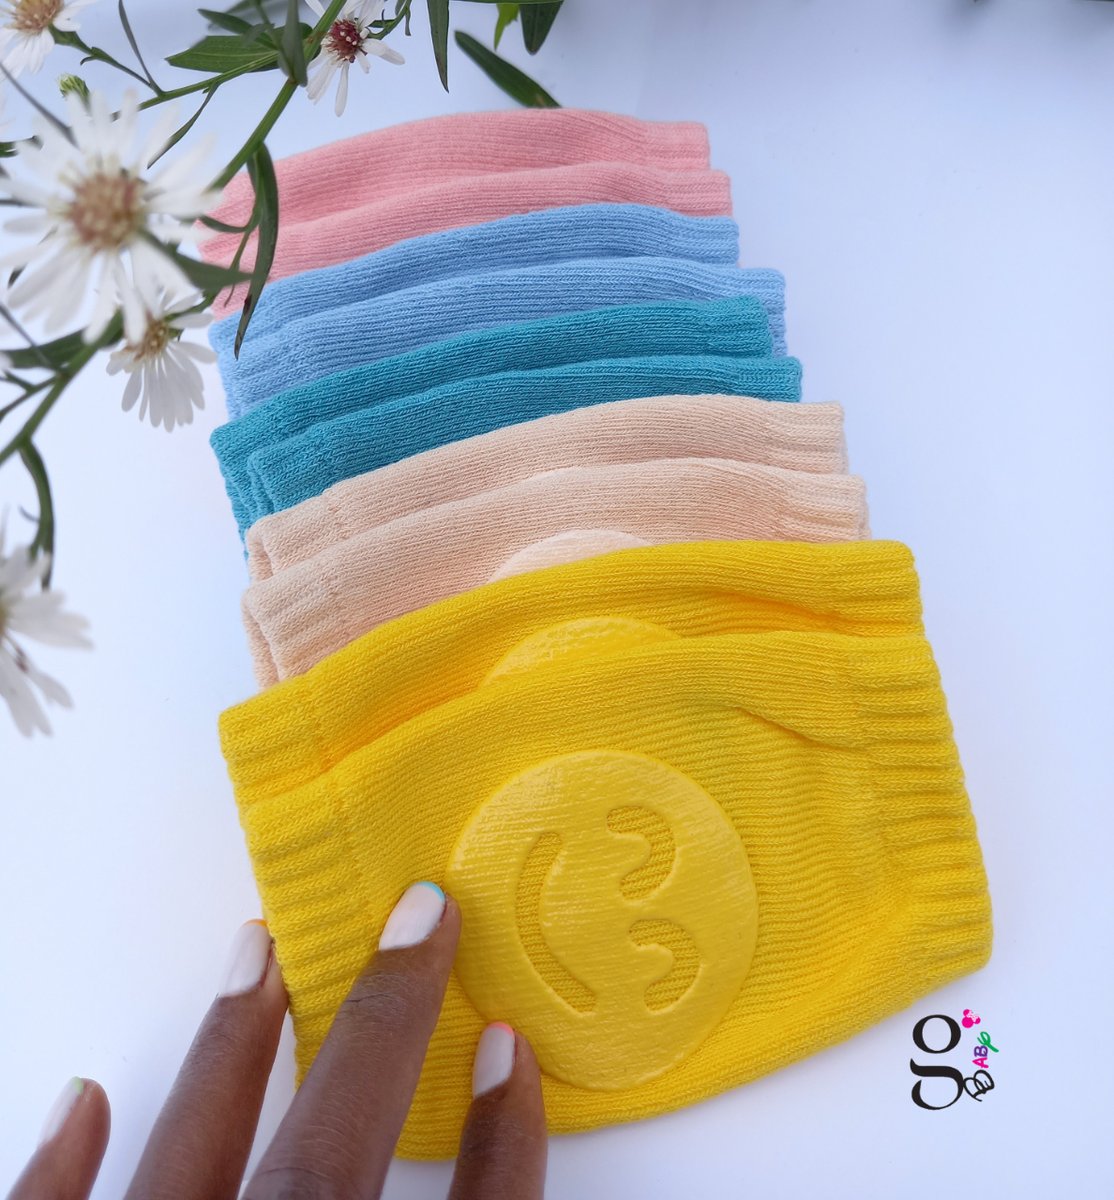 Unleash the cuteness with our Anti-Skid Knee Pads! 👶Perfect for your little explorer's adventures. Now at just UGX 16,000 a pair, because every crawl deserves comfort and style! #BabySafety #GiseldaBaby #AntiSkidKneePads #CuteCrawls #ParentingEssentials #ShopSmart #TinySteps